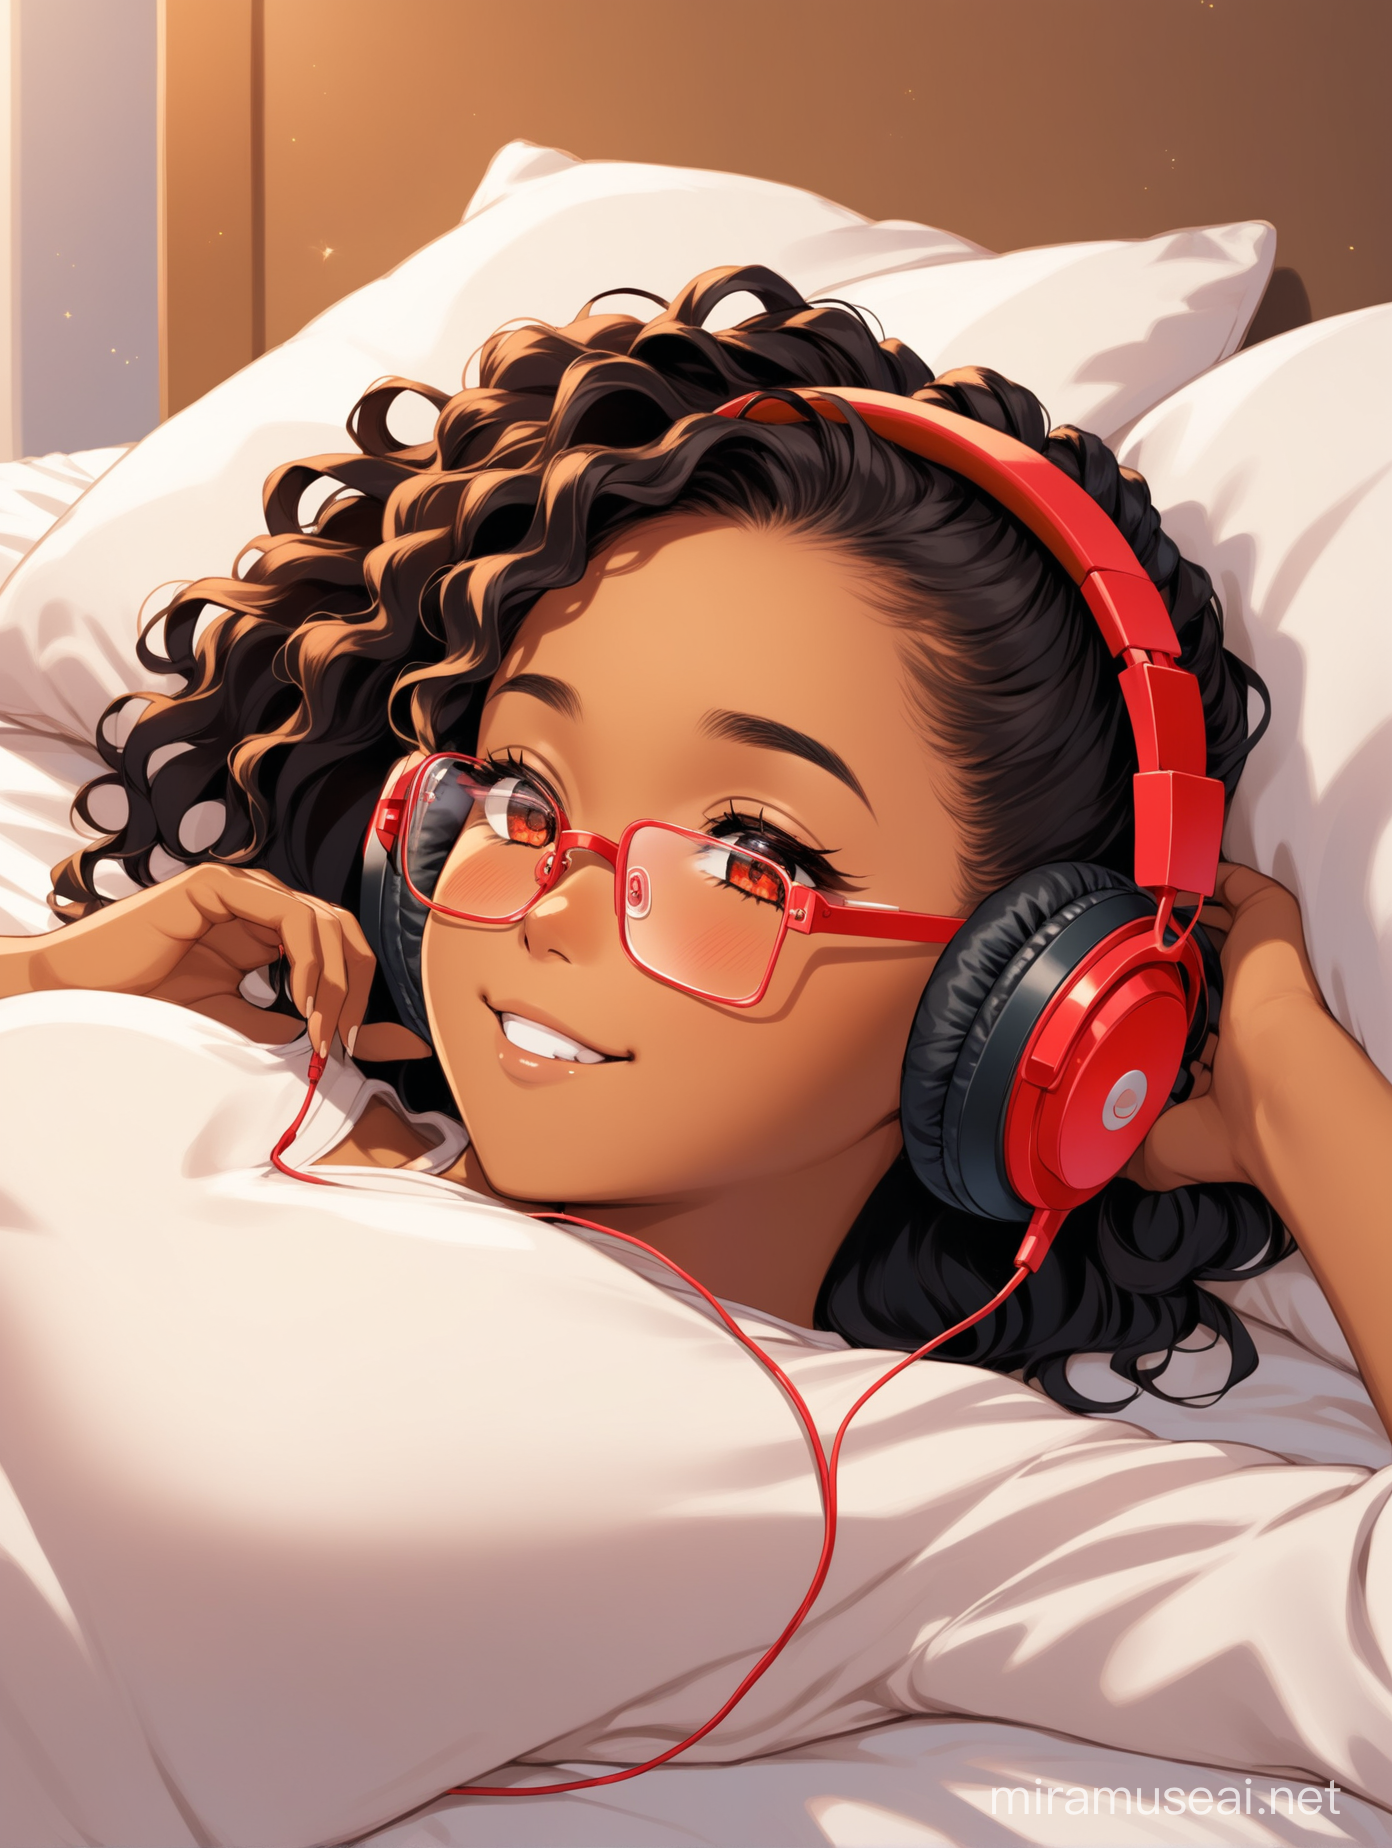 Young Woman Enjoying Music with Passion Twist Hairstyle and Red Glasses